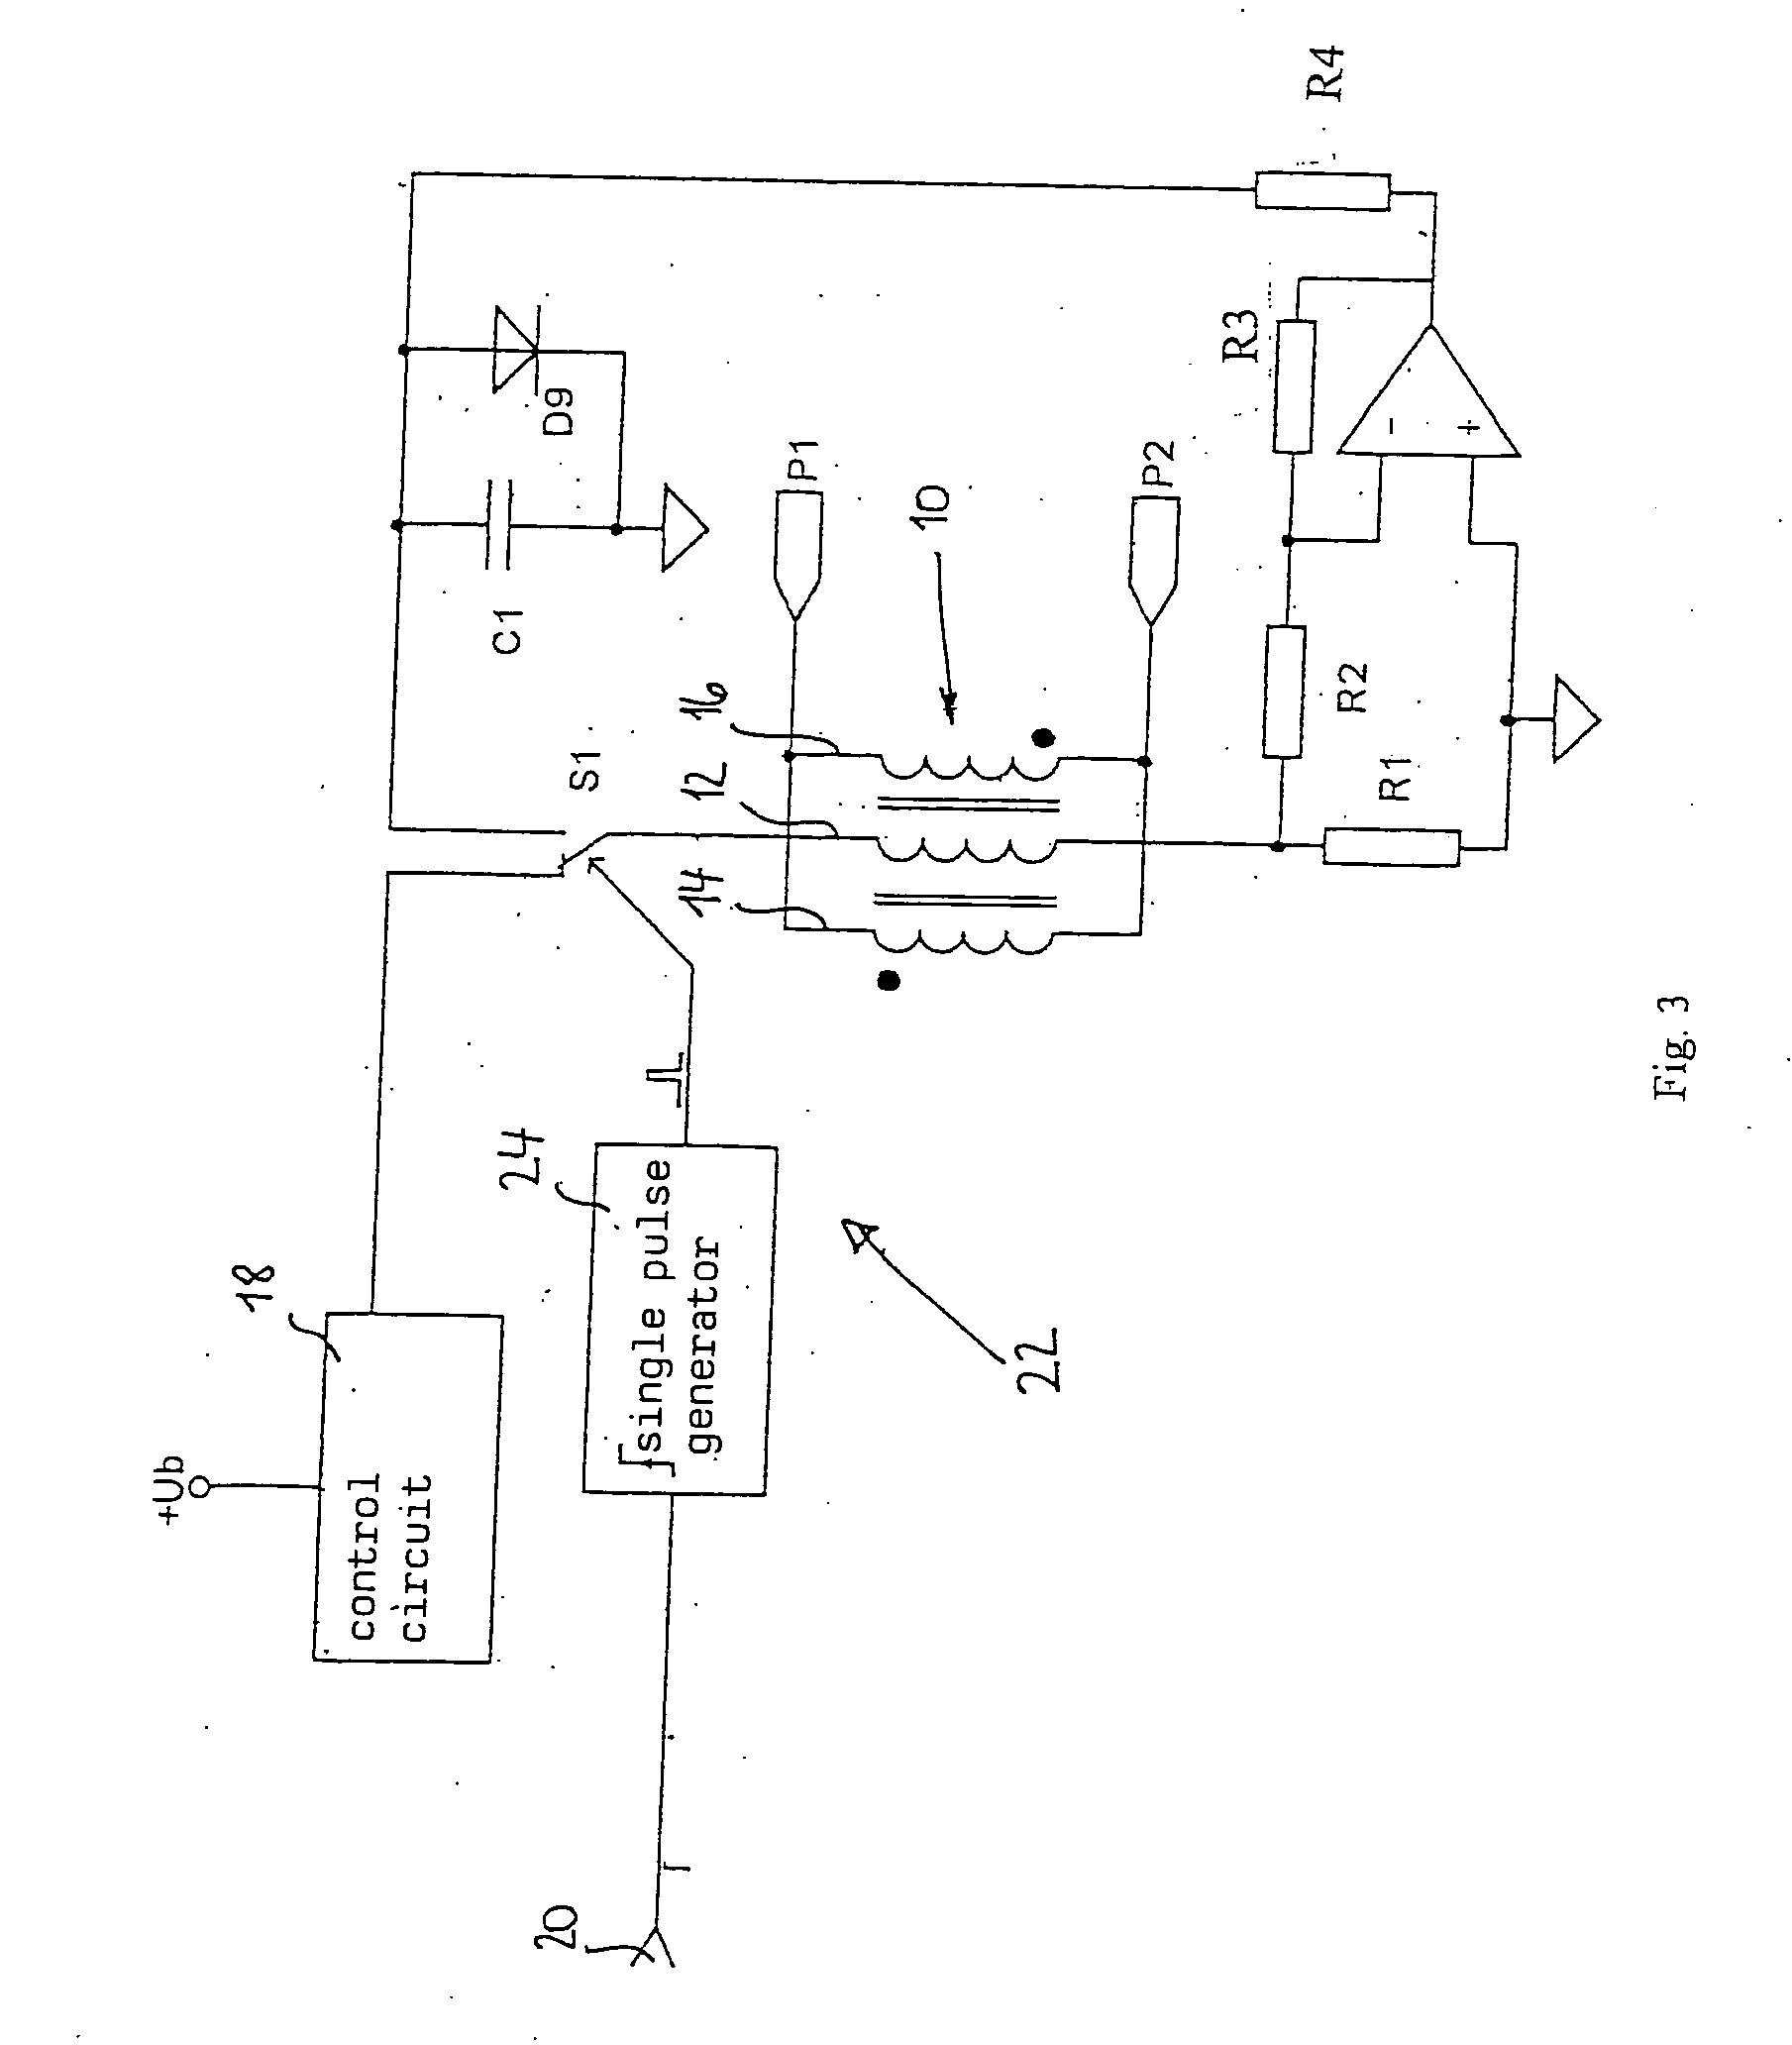 Means for controlling a coil arrangement with electrically variable inductance